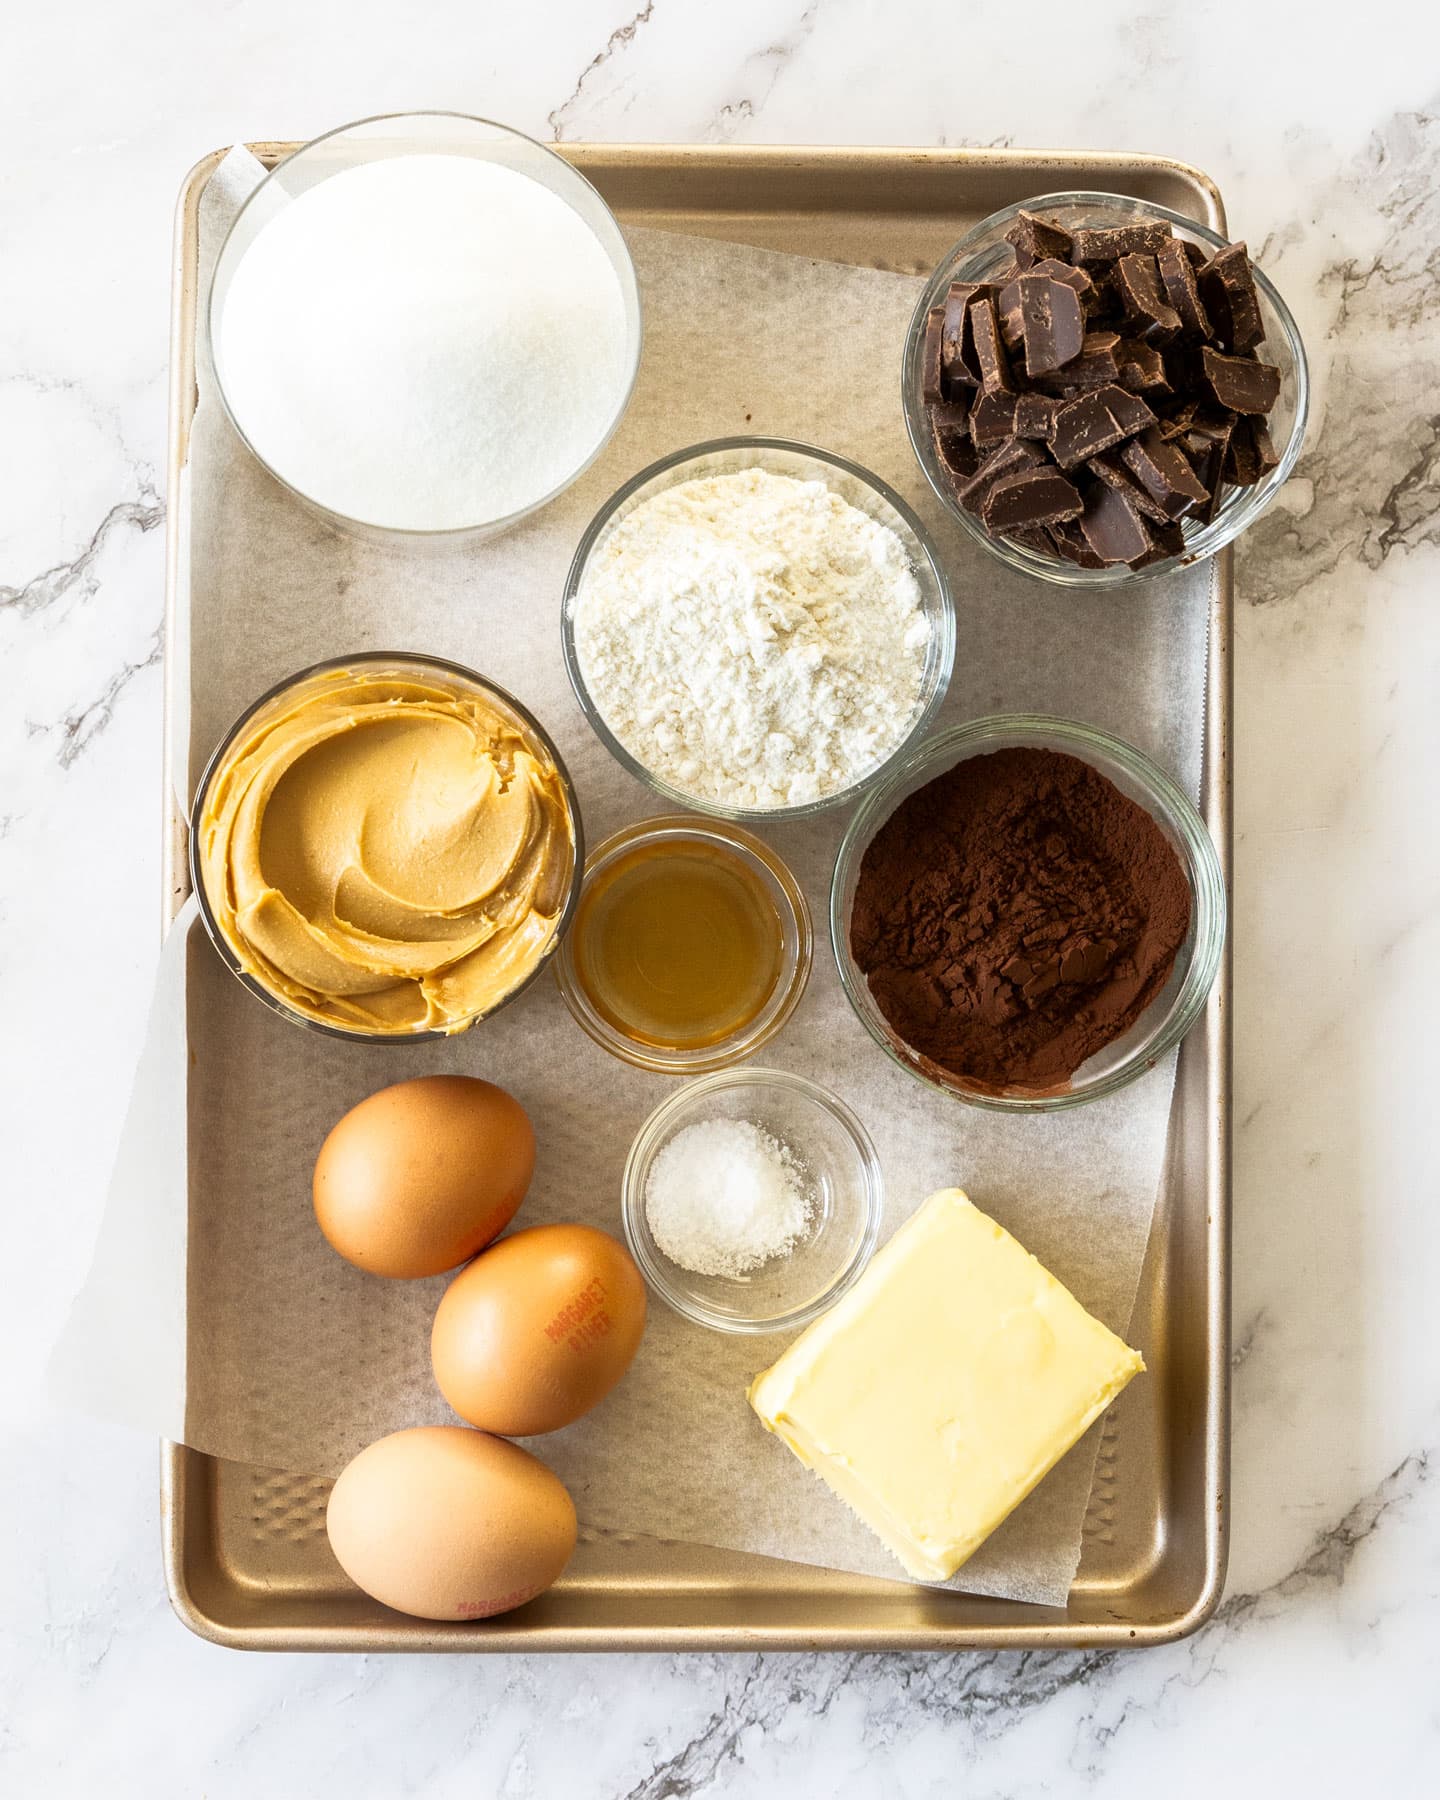 Ingredients for peanut butter brownies on a baking tray.